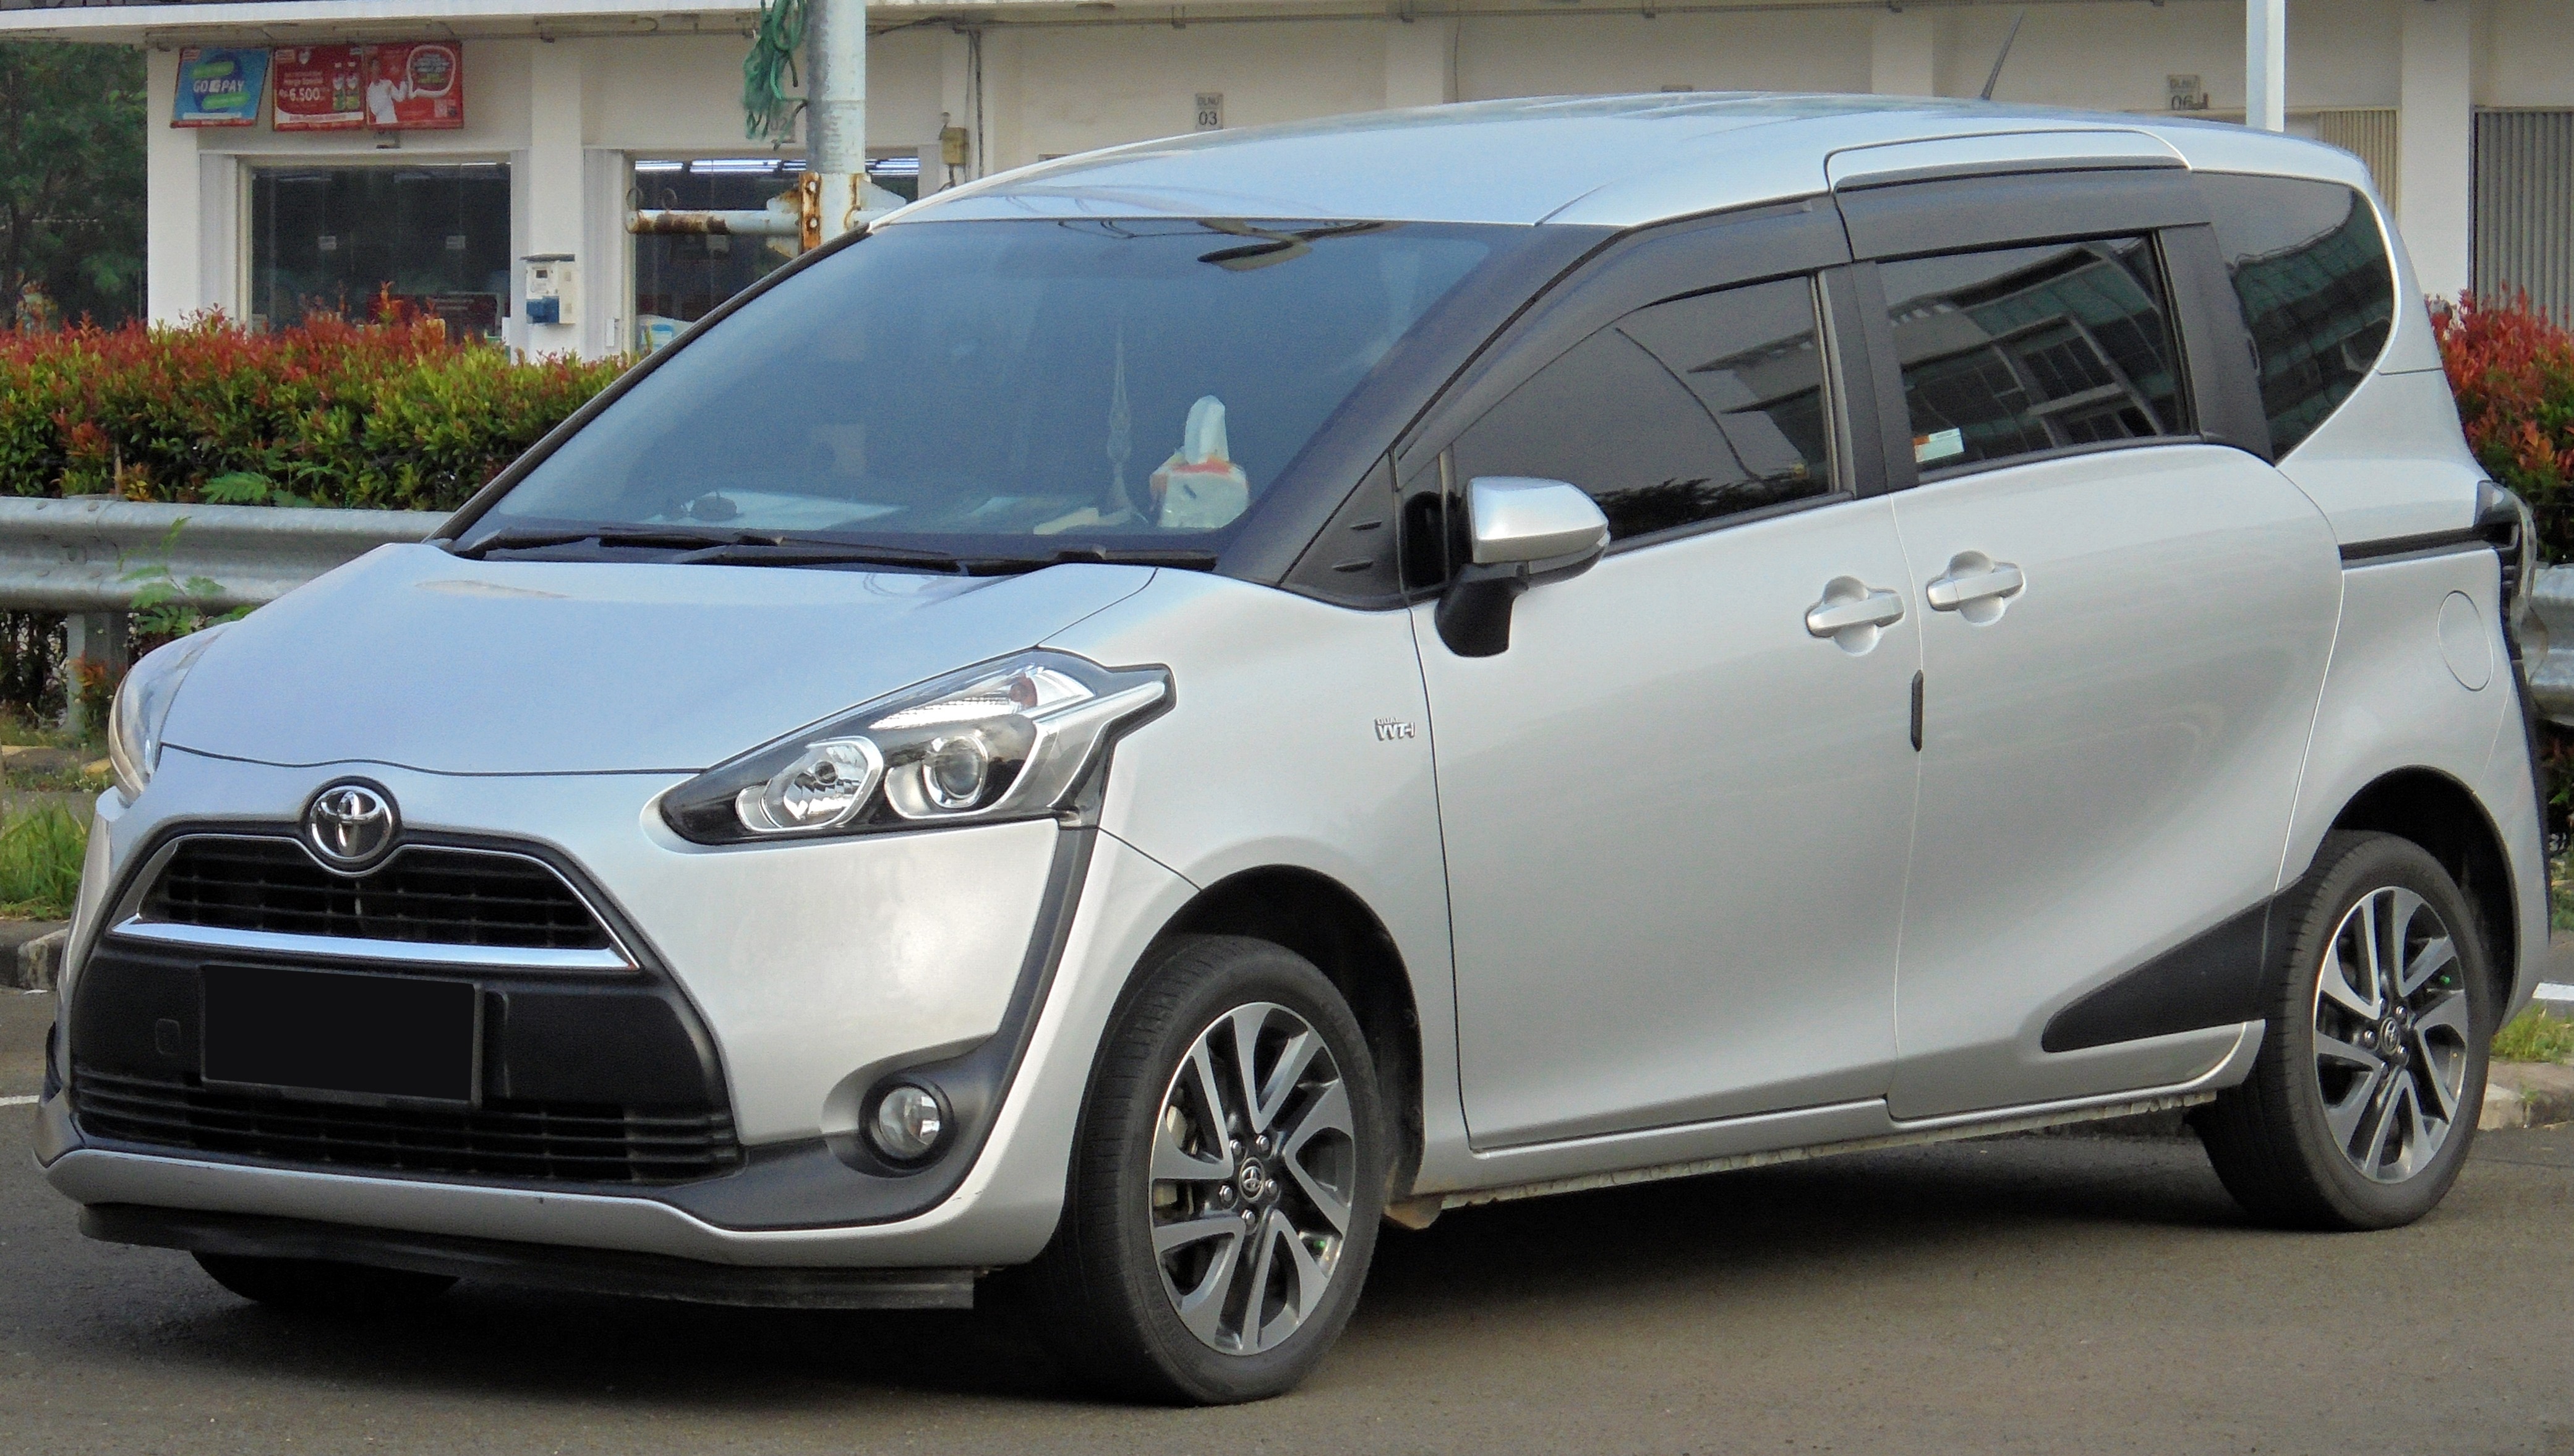 Labelled Diagram Of A Car toyota Sienta Of Labelled Diagram Of A Car